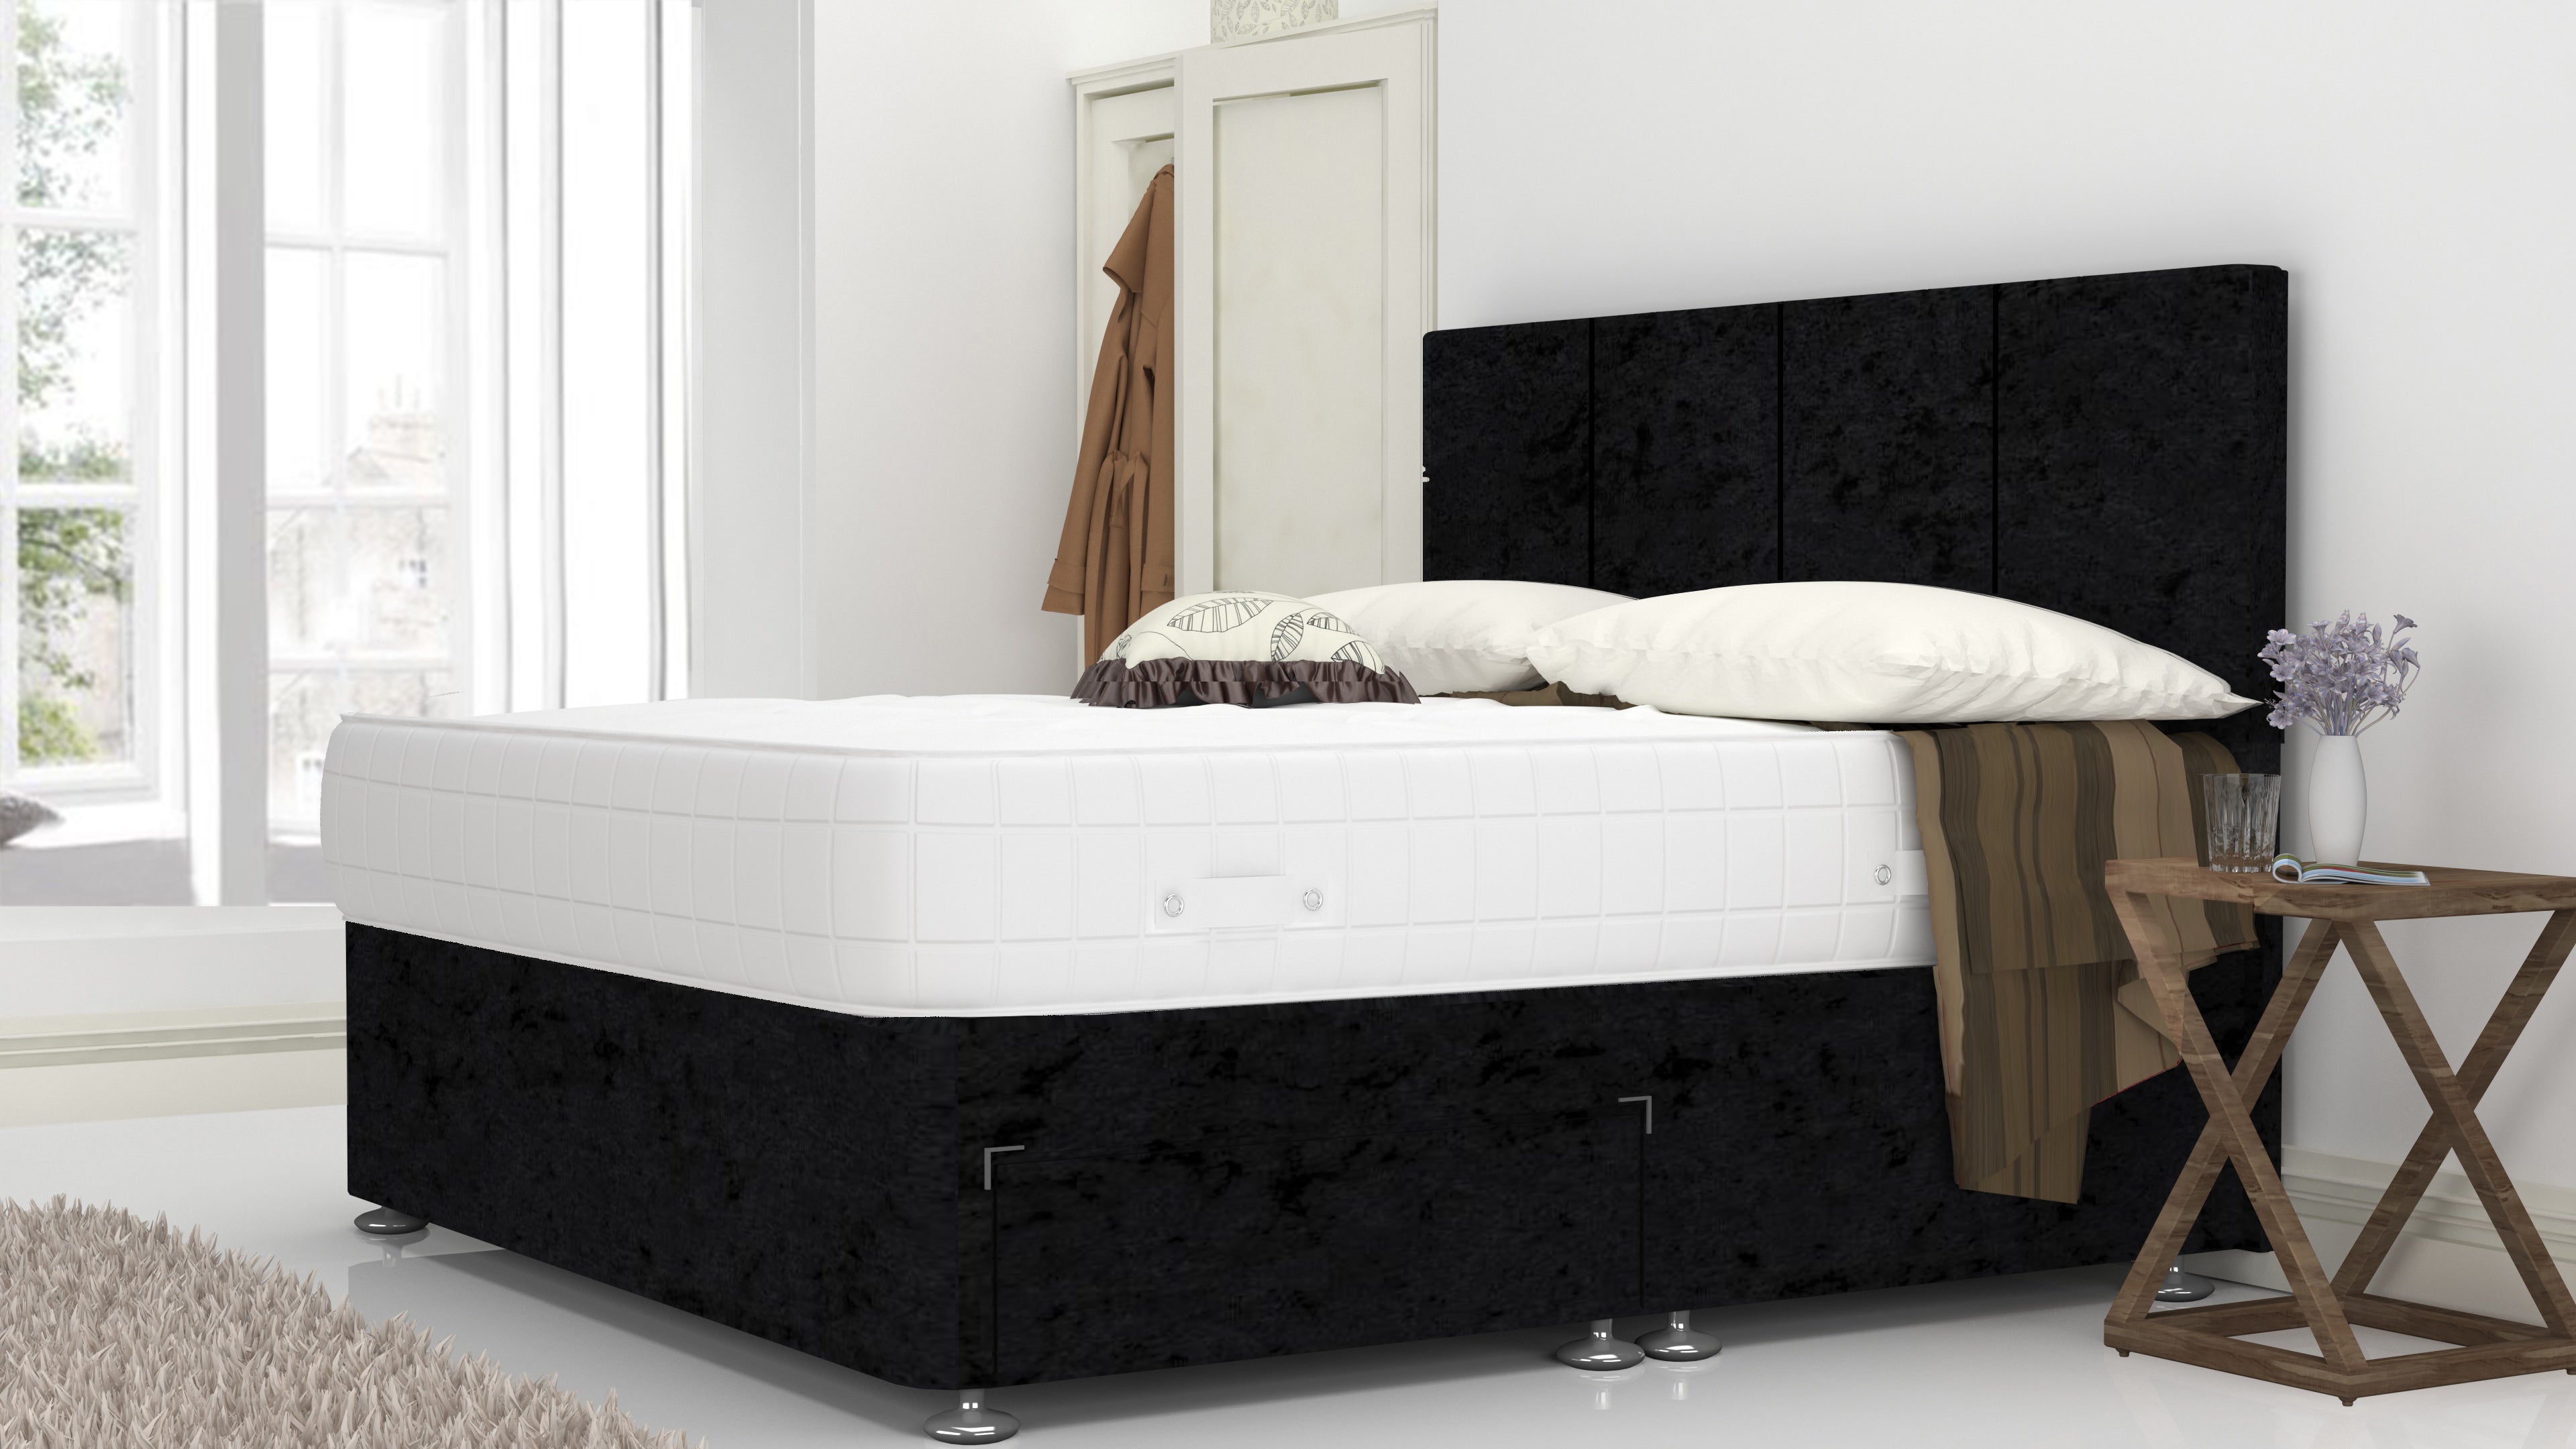 Black Crushed 4FT 6" Divan Bed Set With 4 Panel Headboard (Included Feet) And Free Tinsel Top Mattress